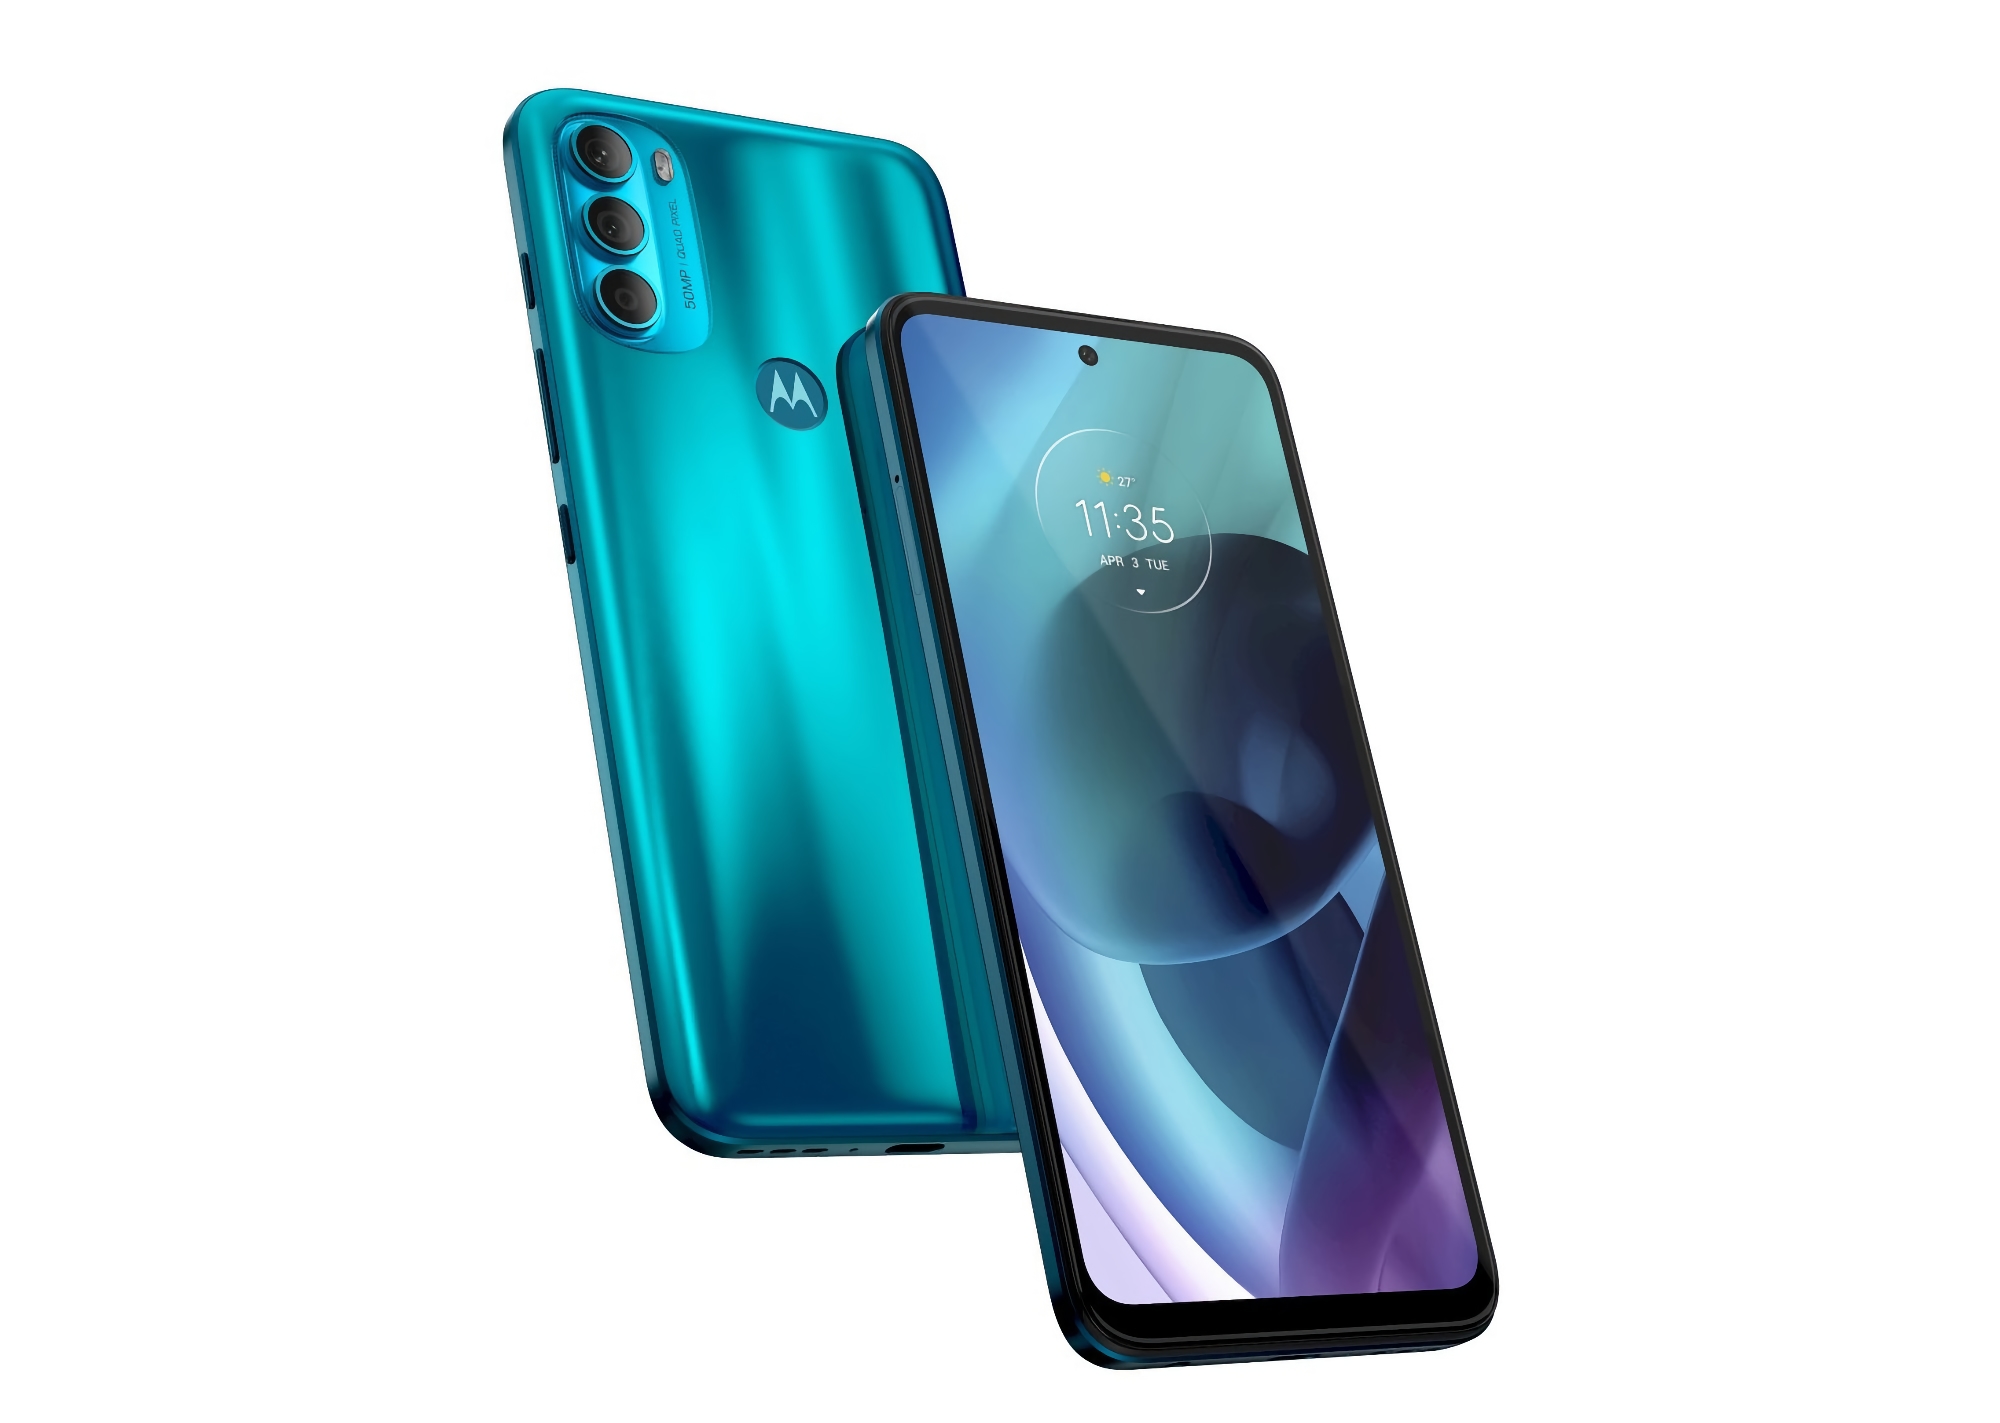 Moto G71: OLED screen, Snapdragon 695 chip, IP52 protection and 50 MP camera for 300 euros